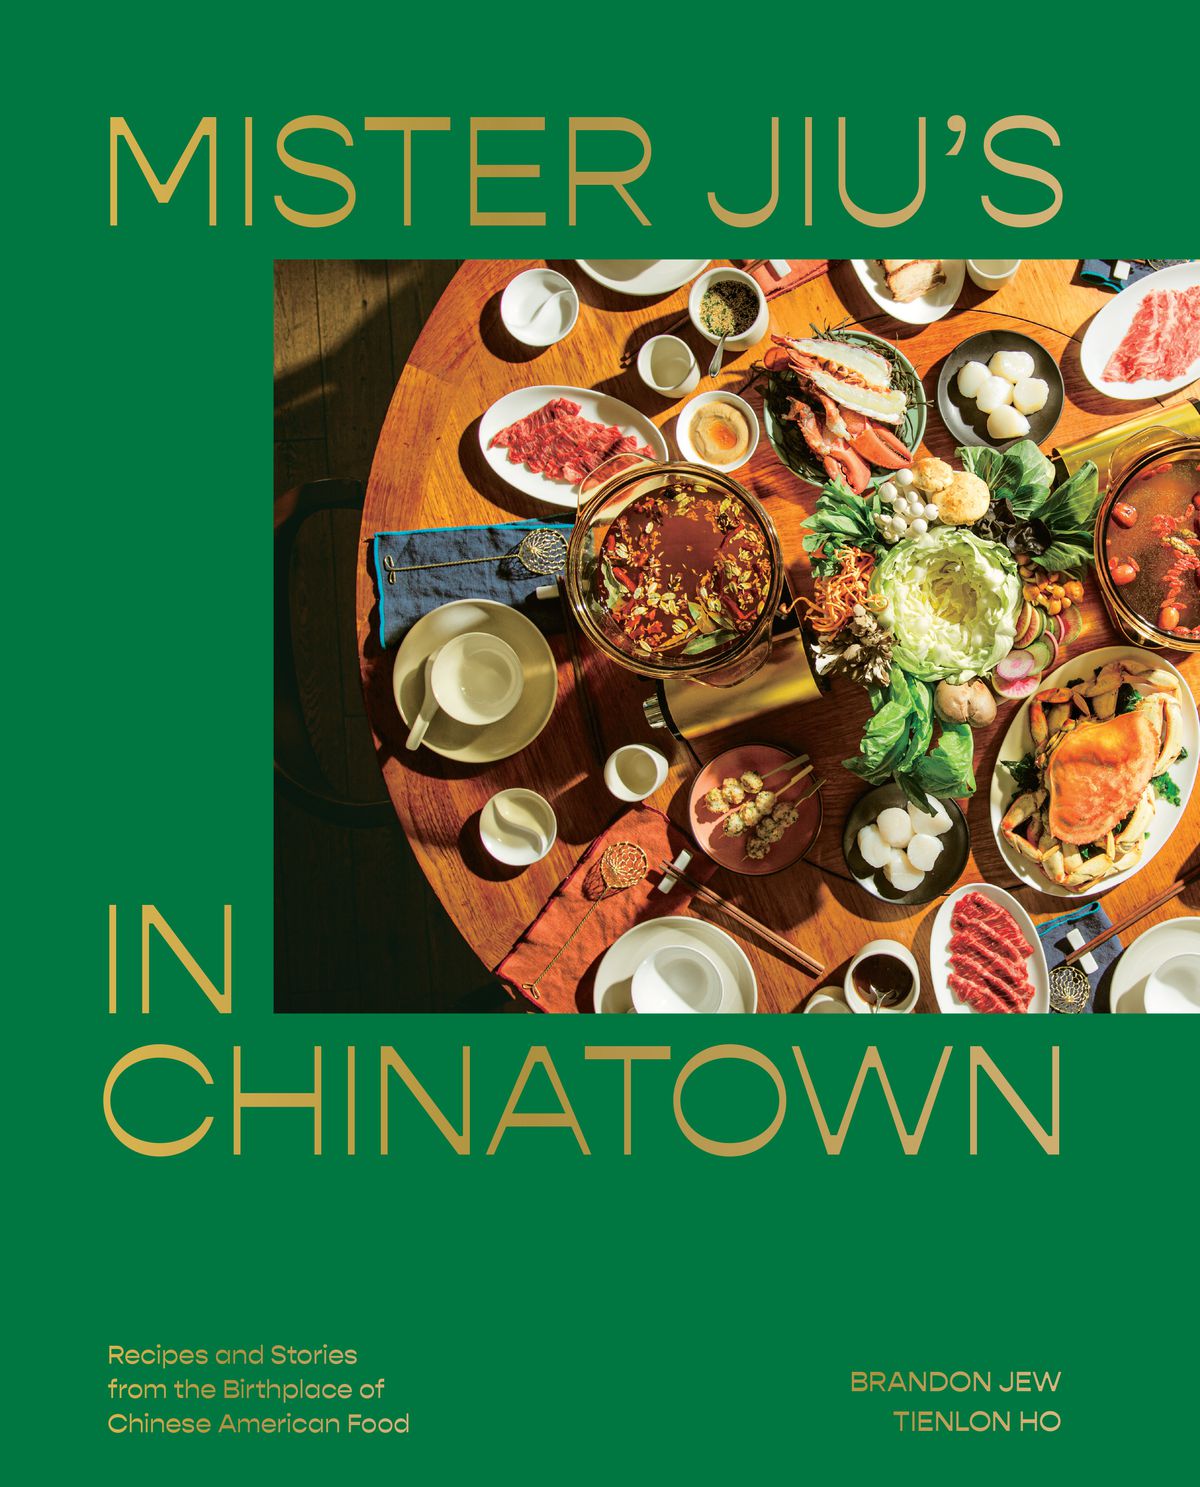 On the cover of Mister Jiu’s Chinatown cookbook, a table is set with a feast.